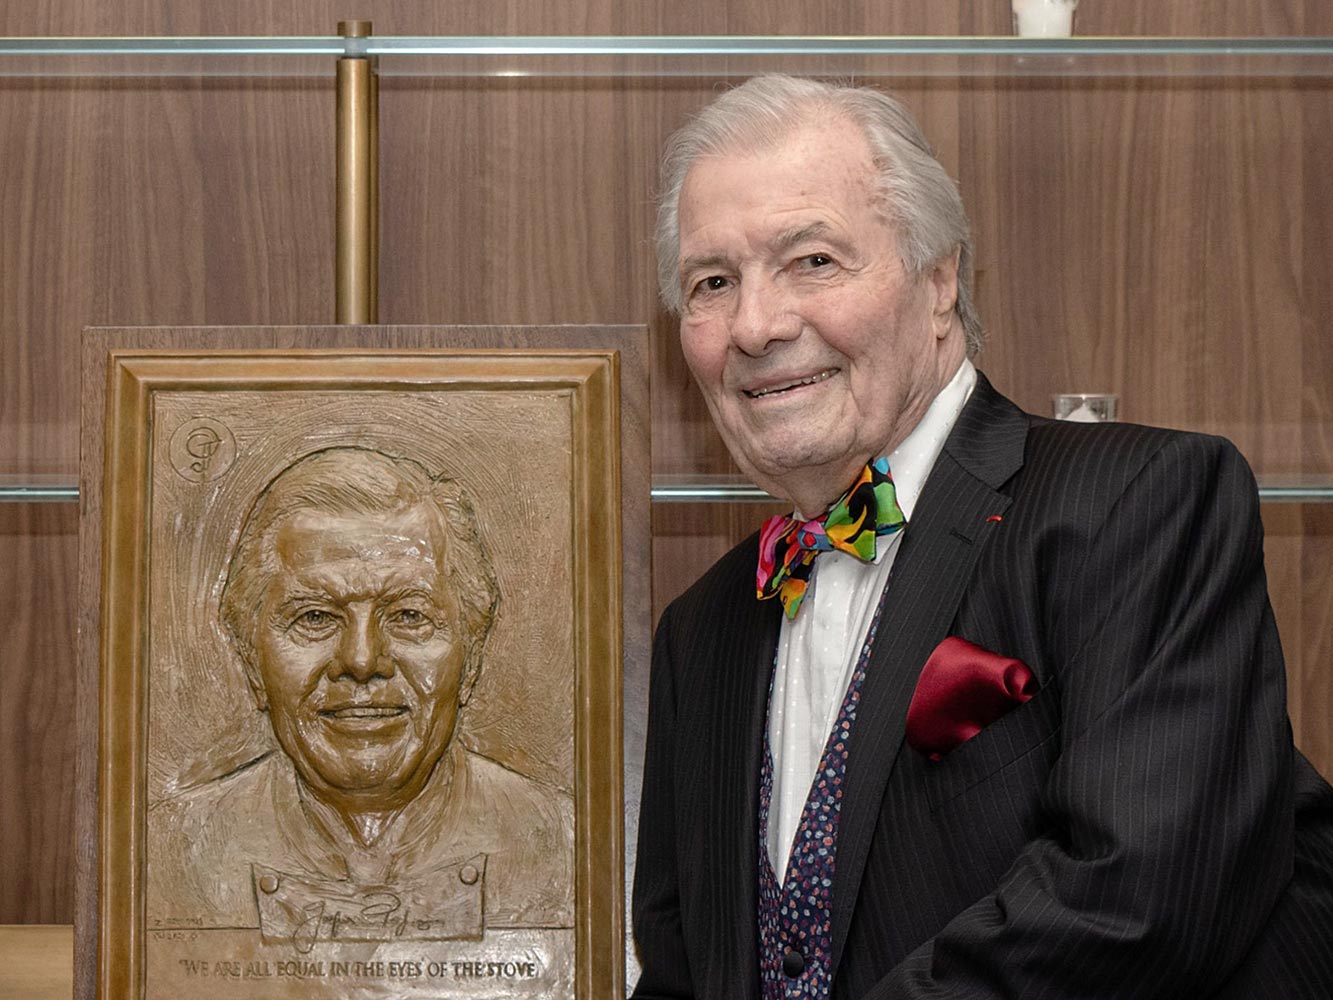 Jacques Pépin standing in front of award